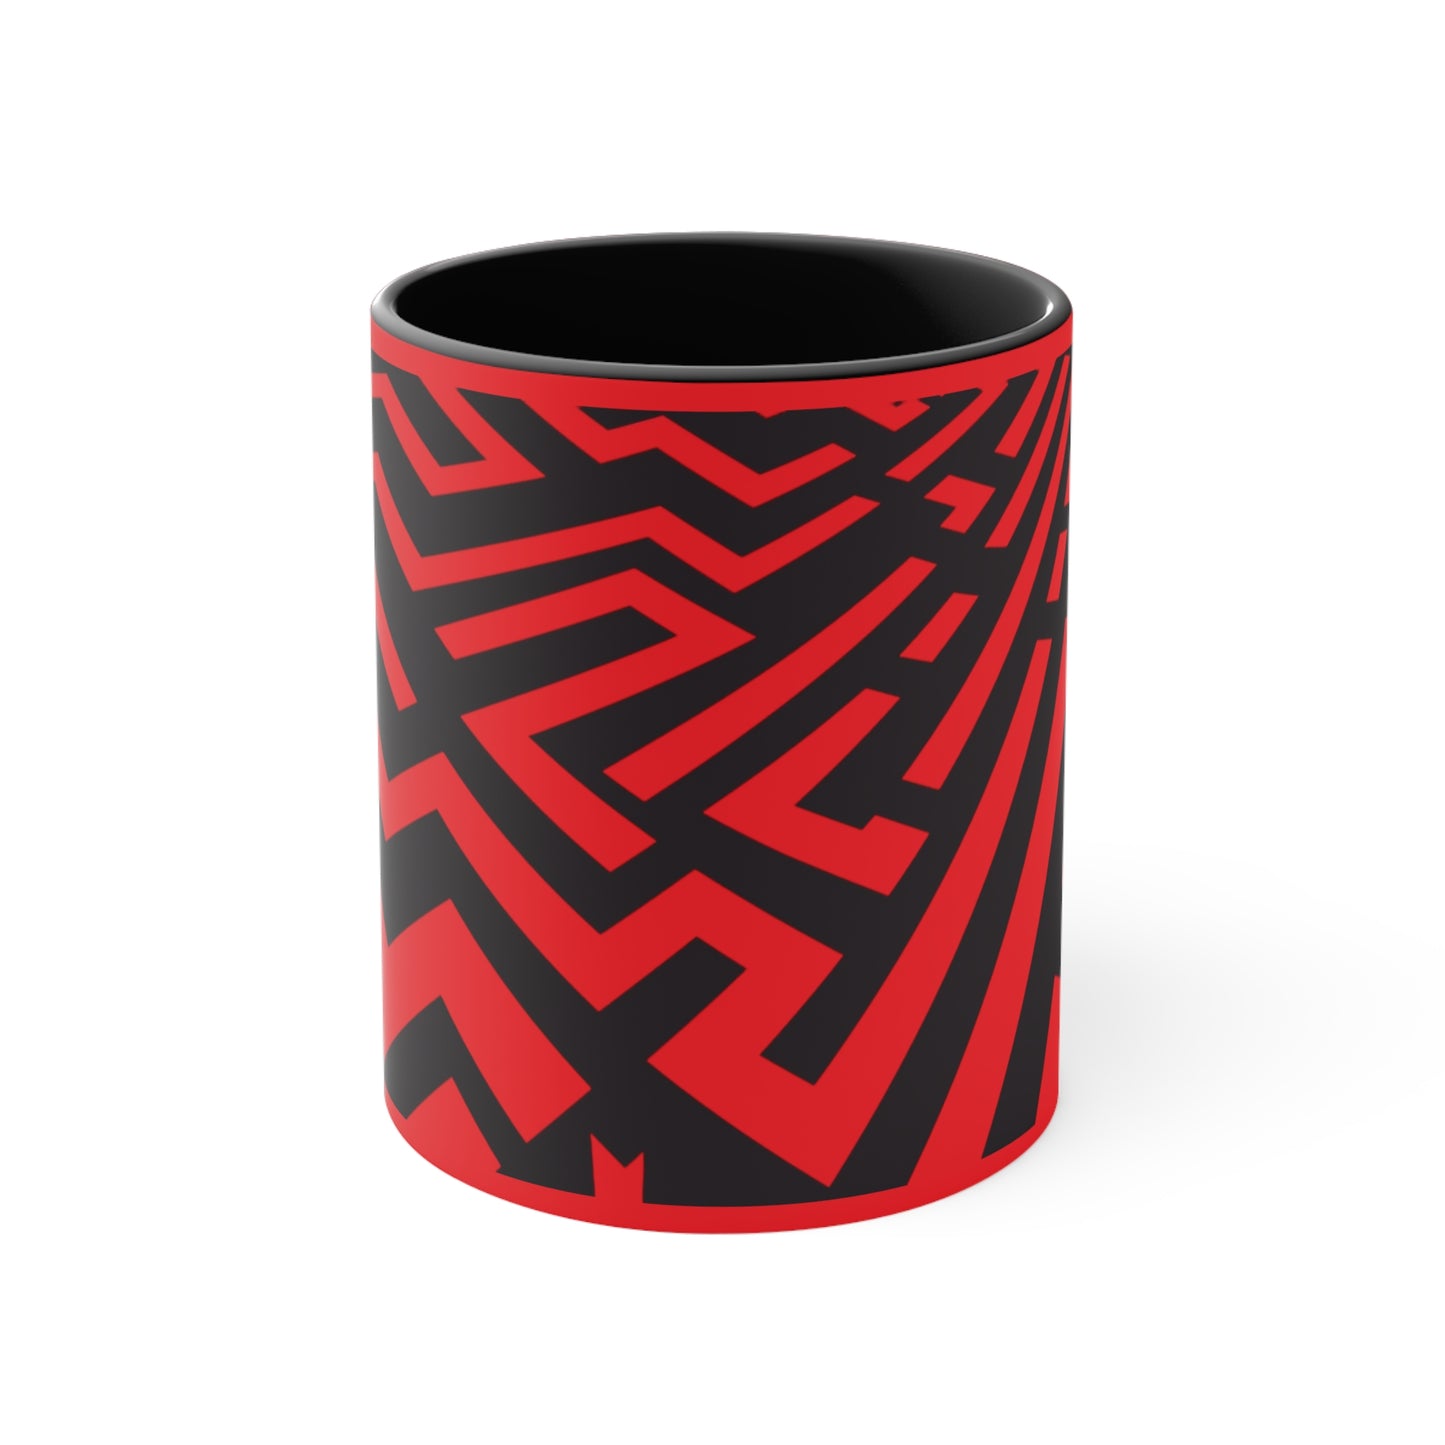 Maze 1 in Red